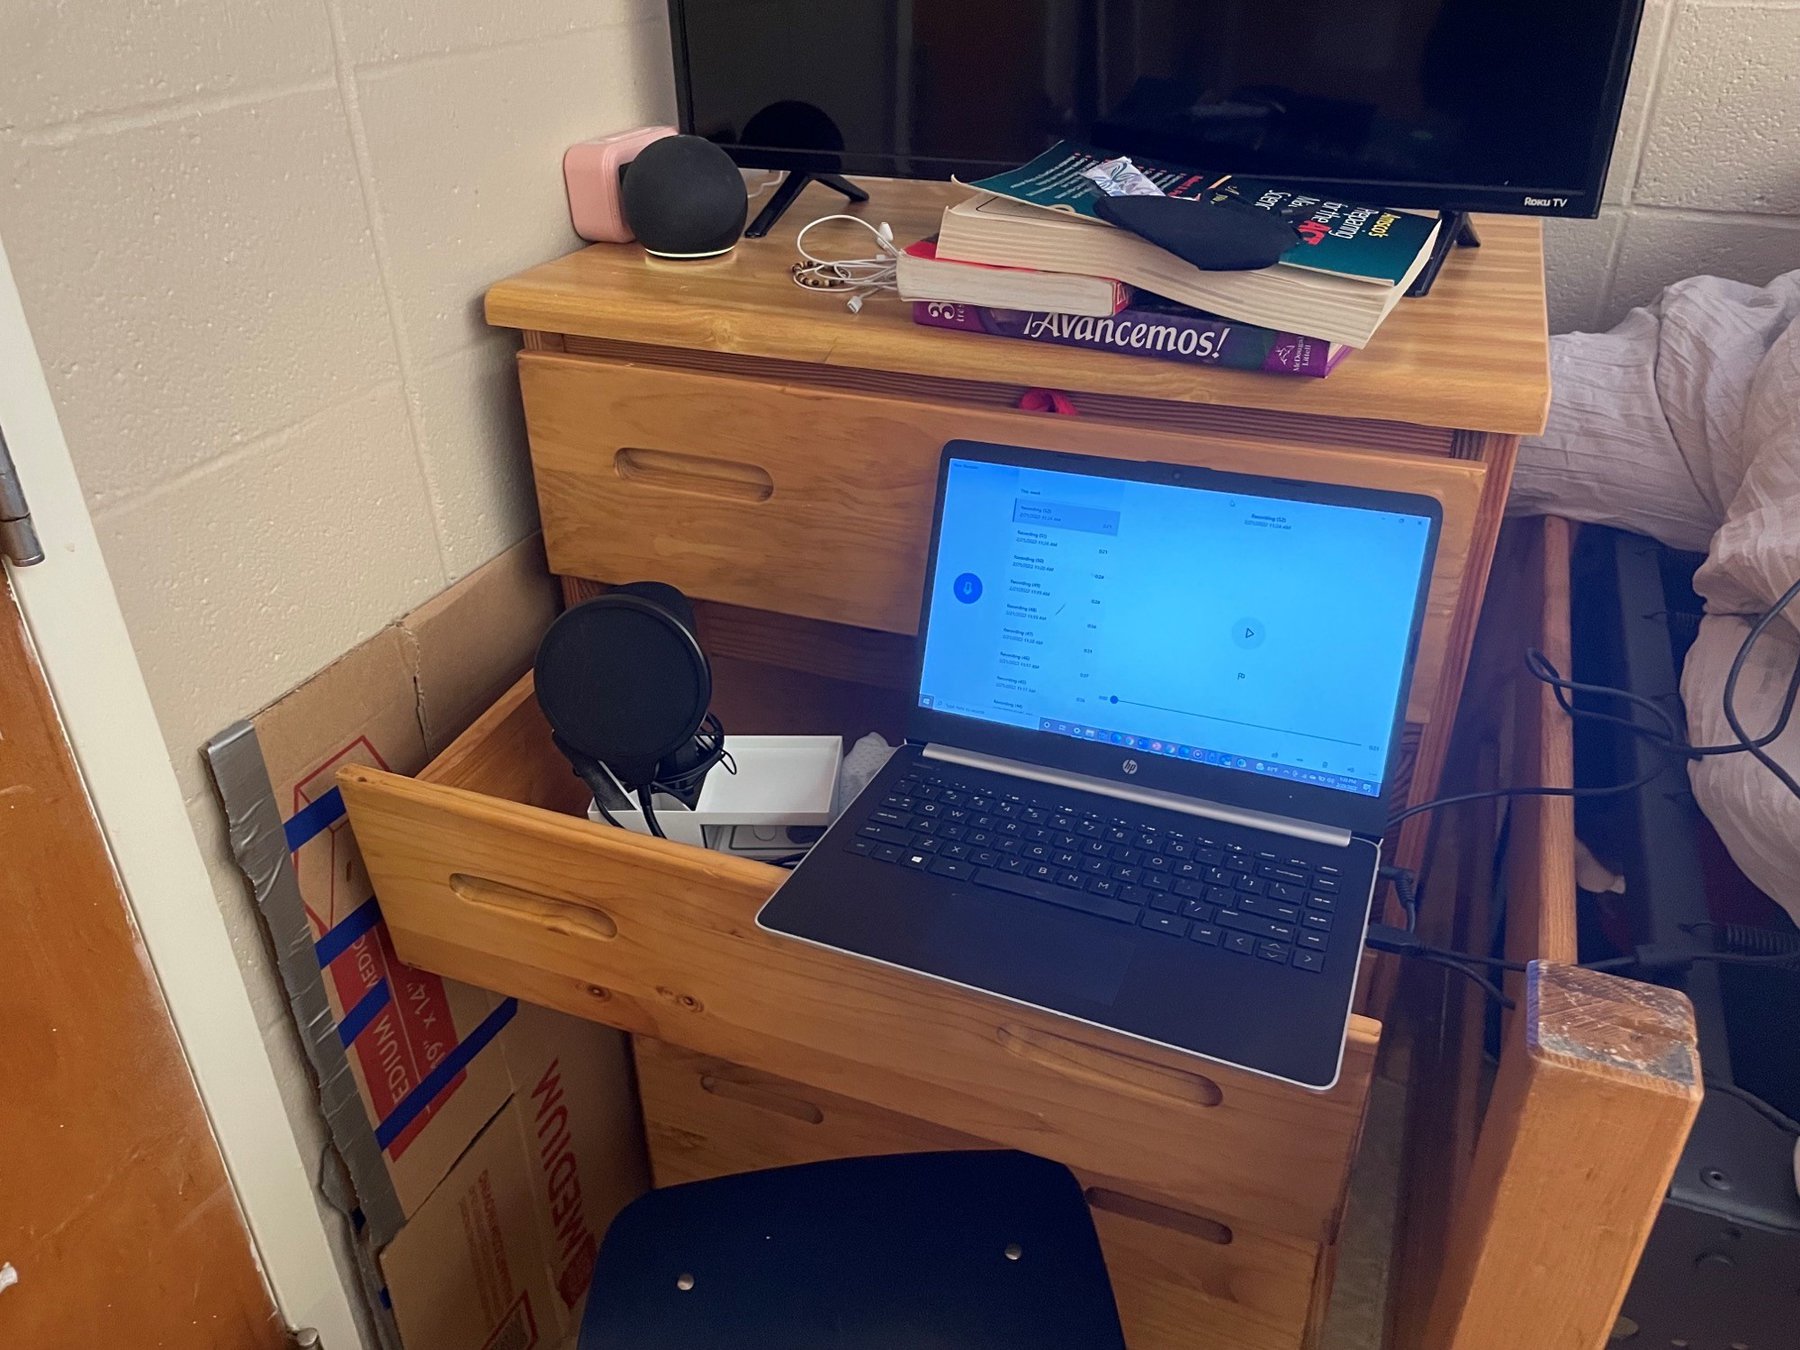 A laptop and studio microphone perched on an open drawer of a dresser to make a makeshift studio in a dorm room